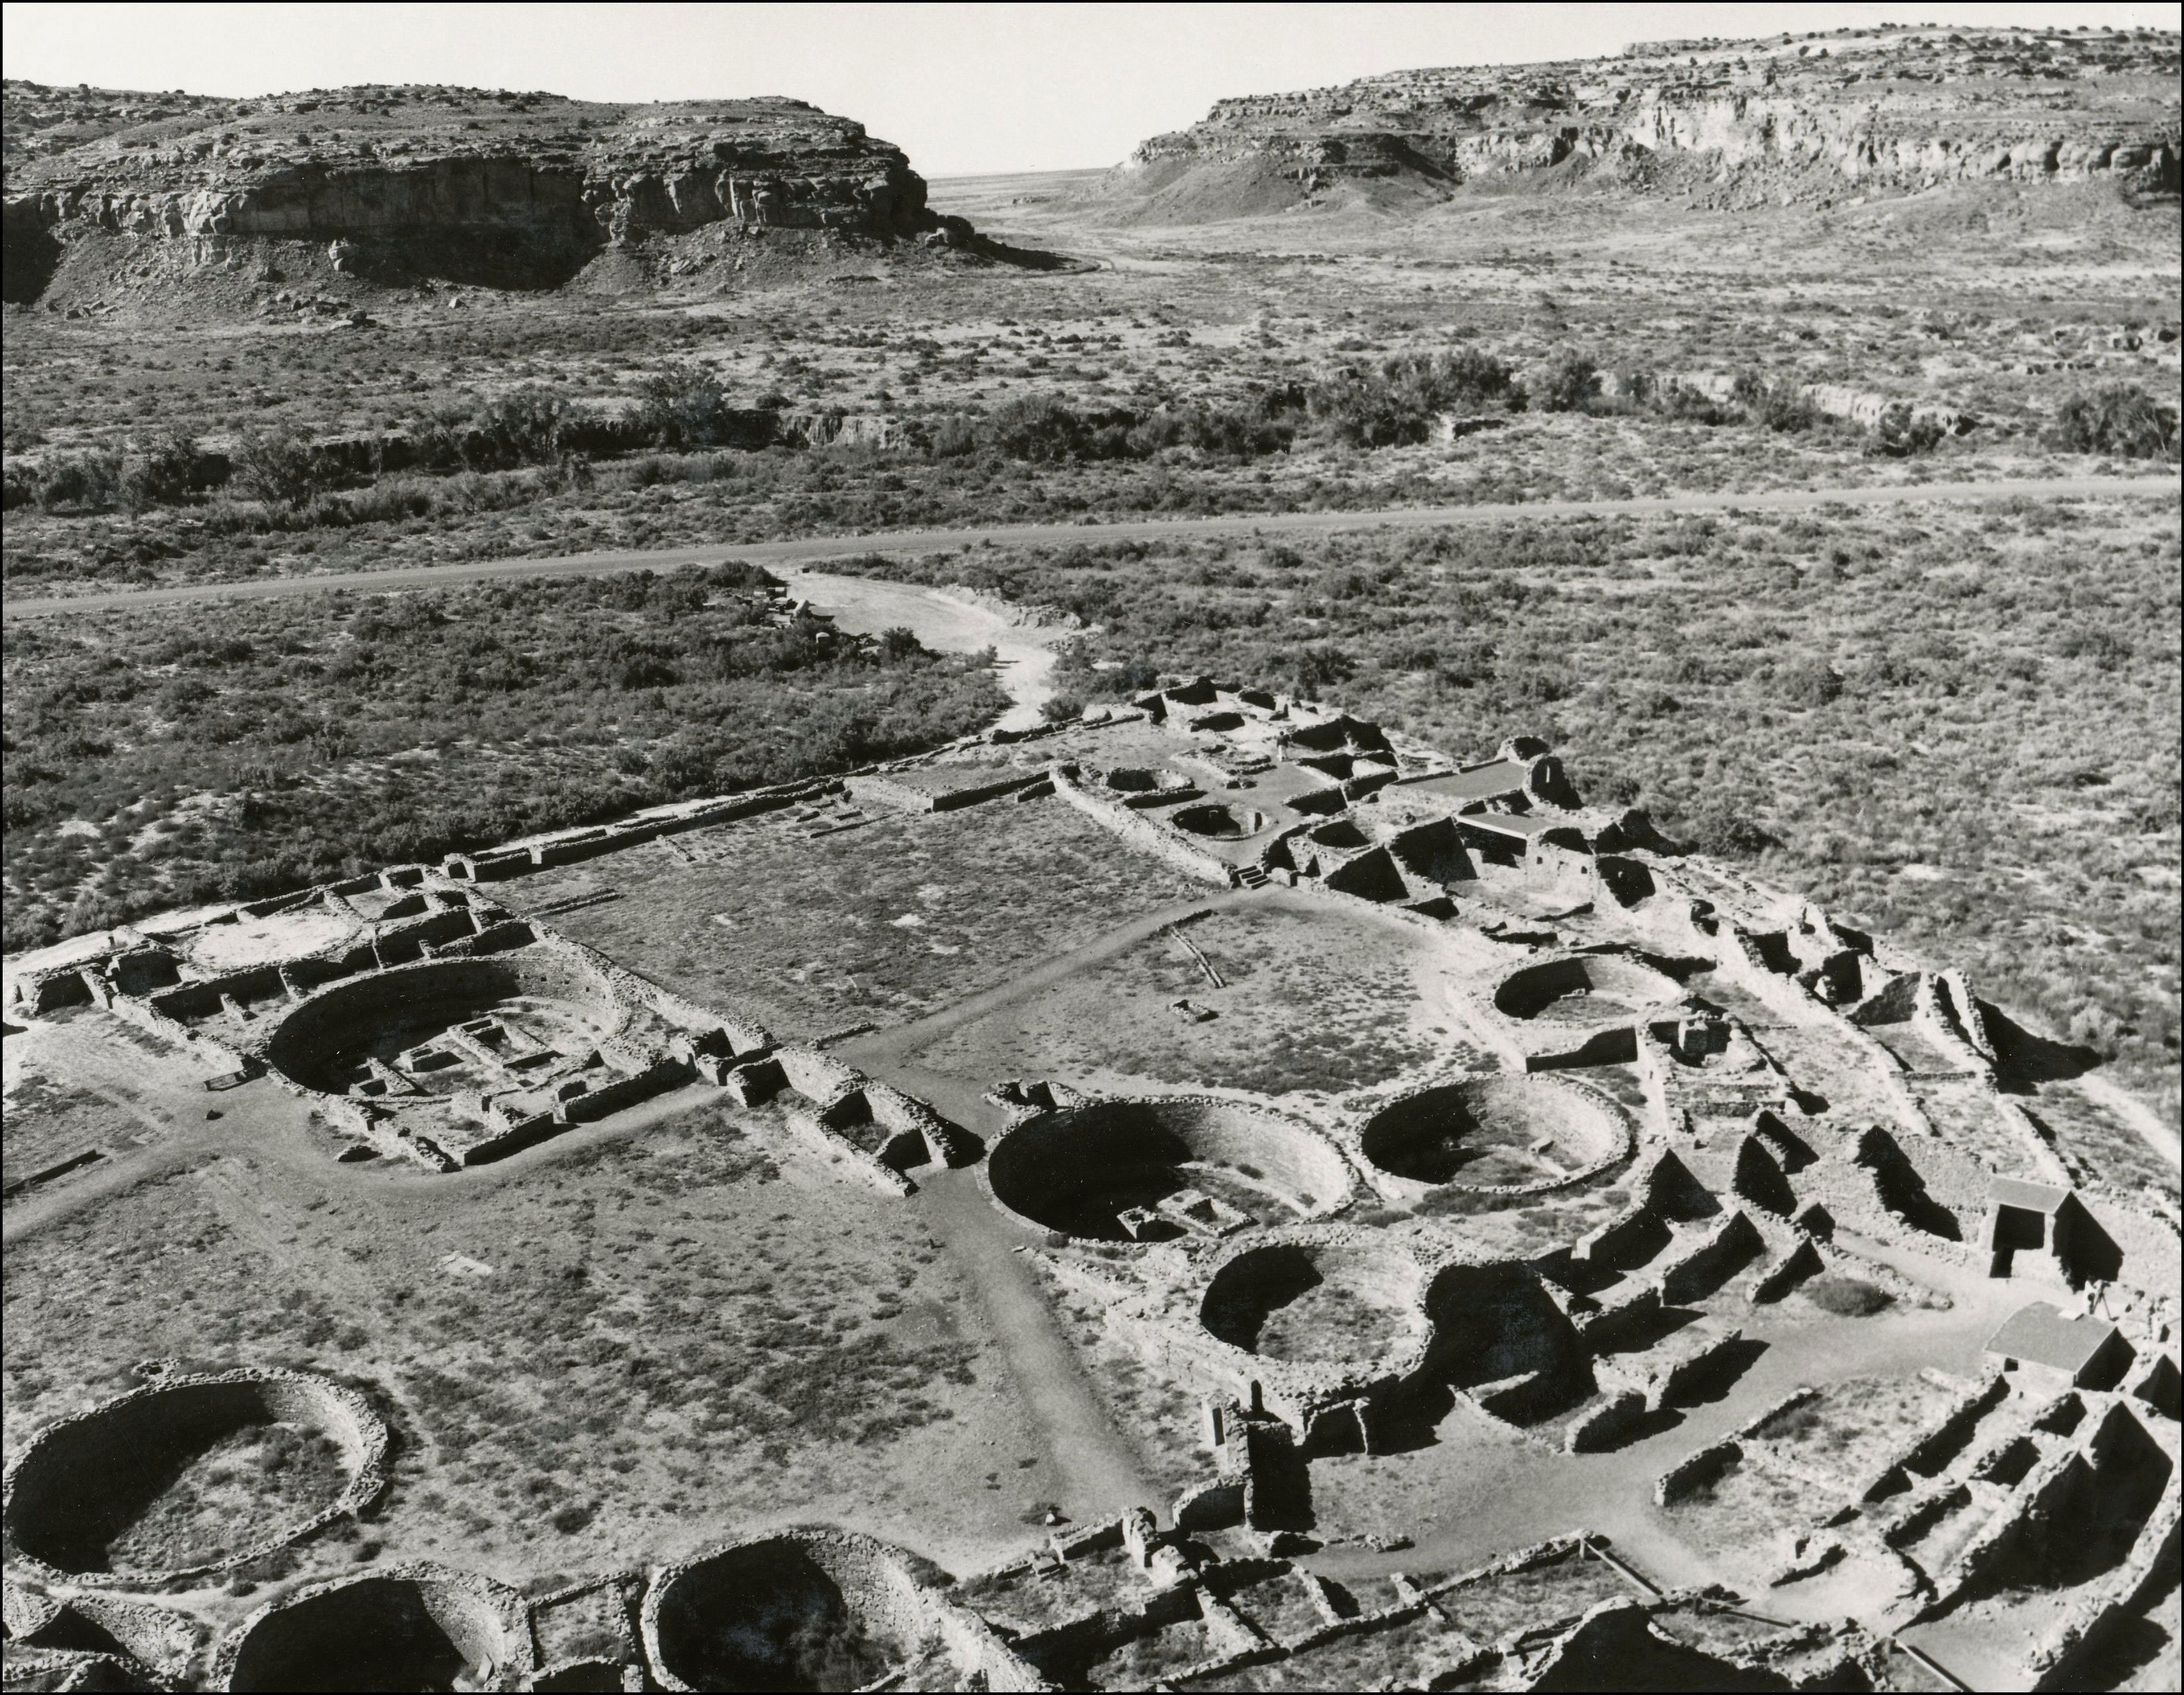 View of village remains at Chaco Culture National Historical Park